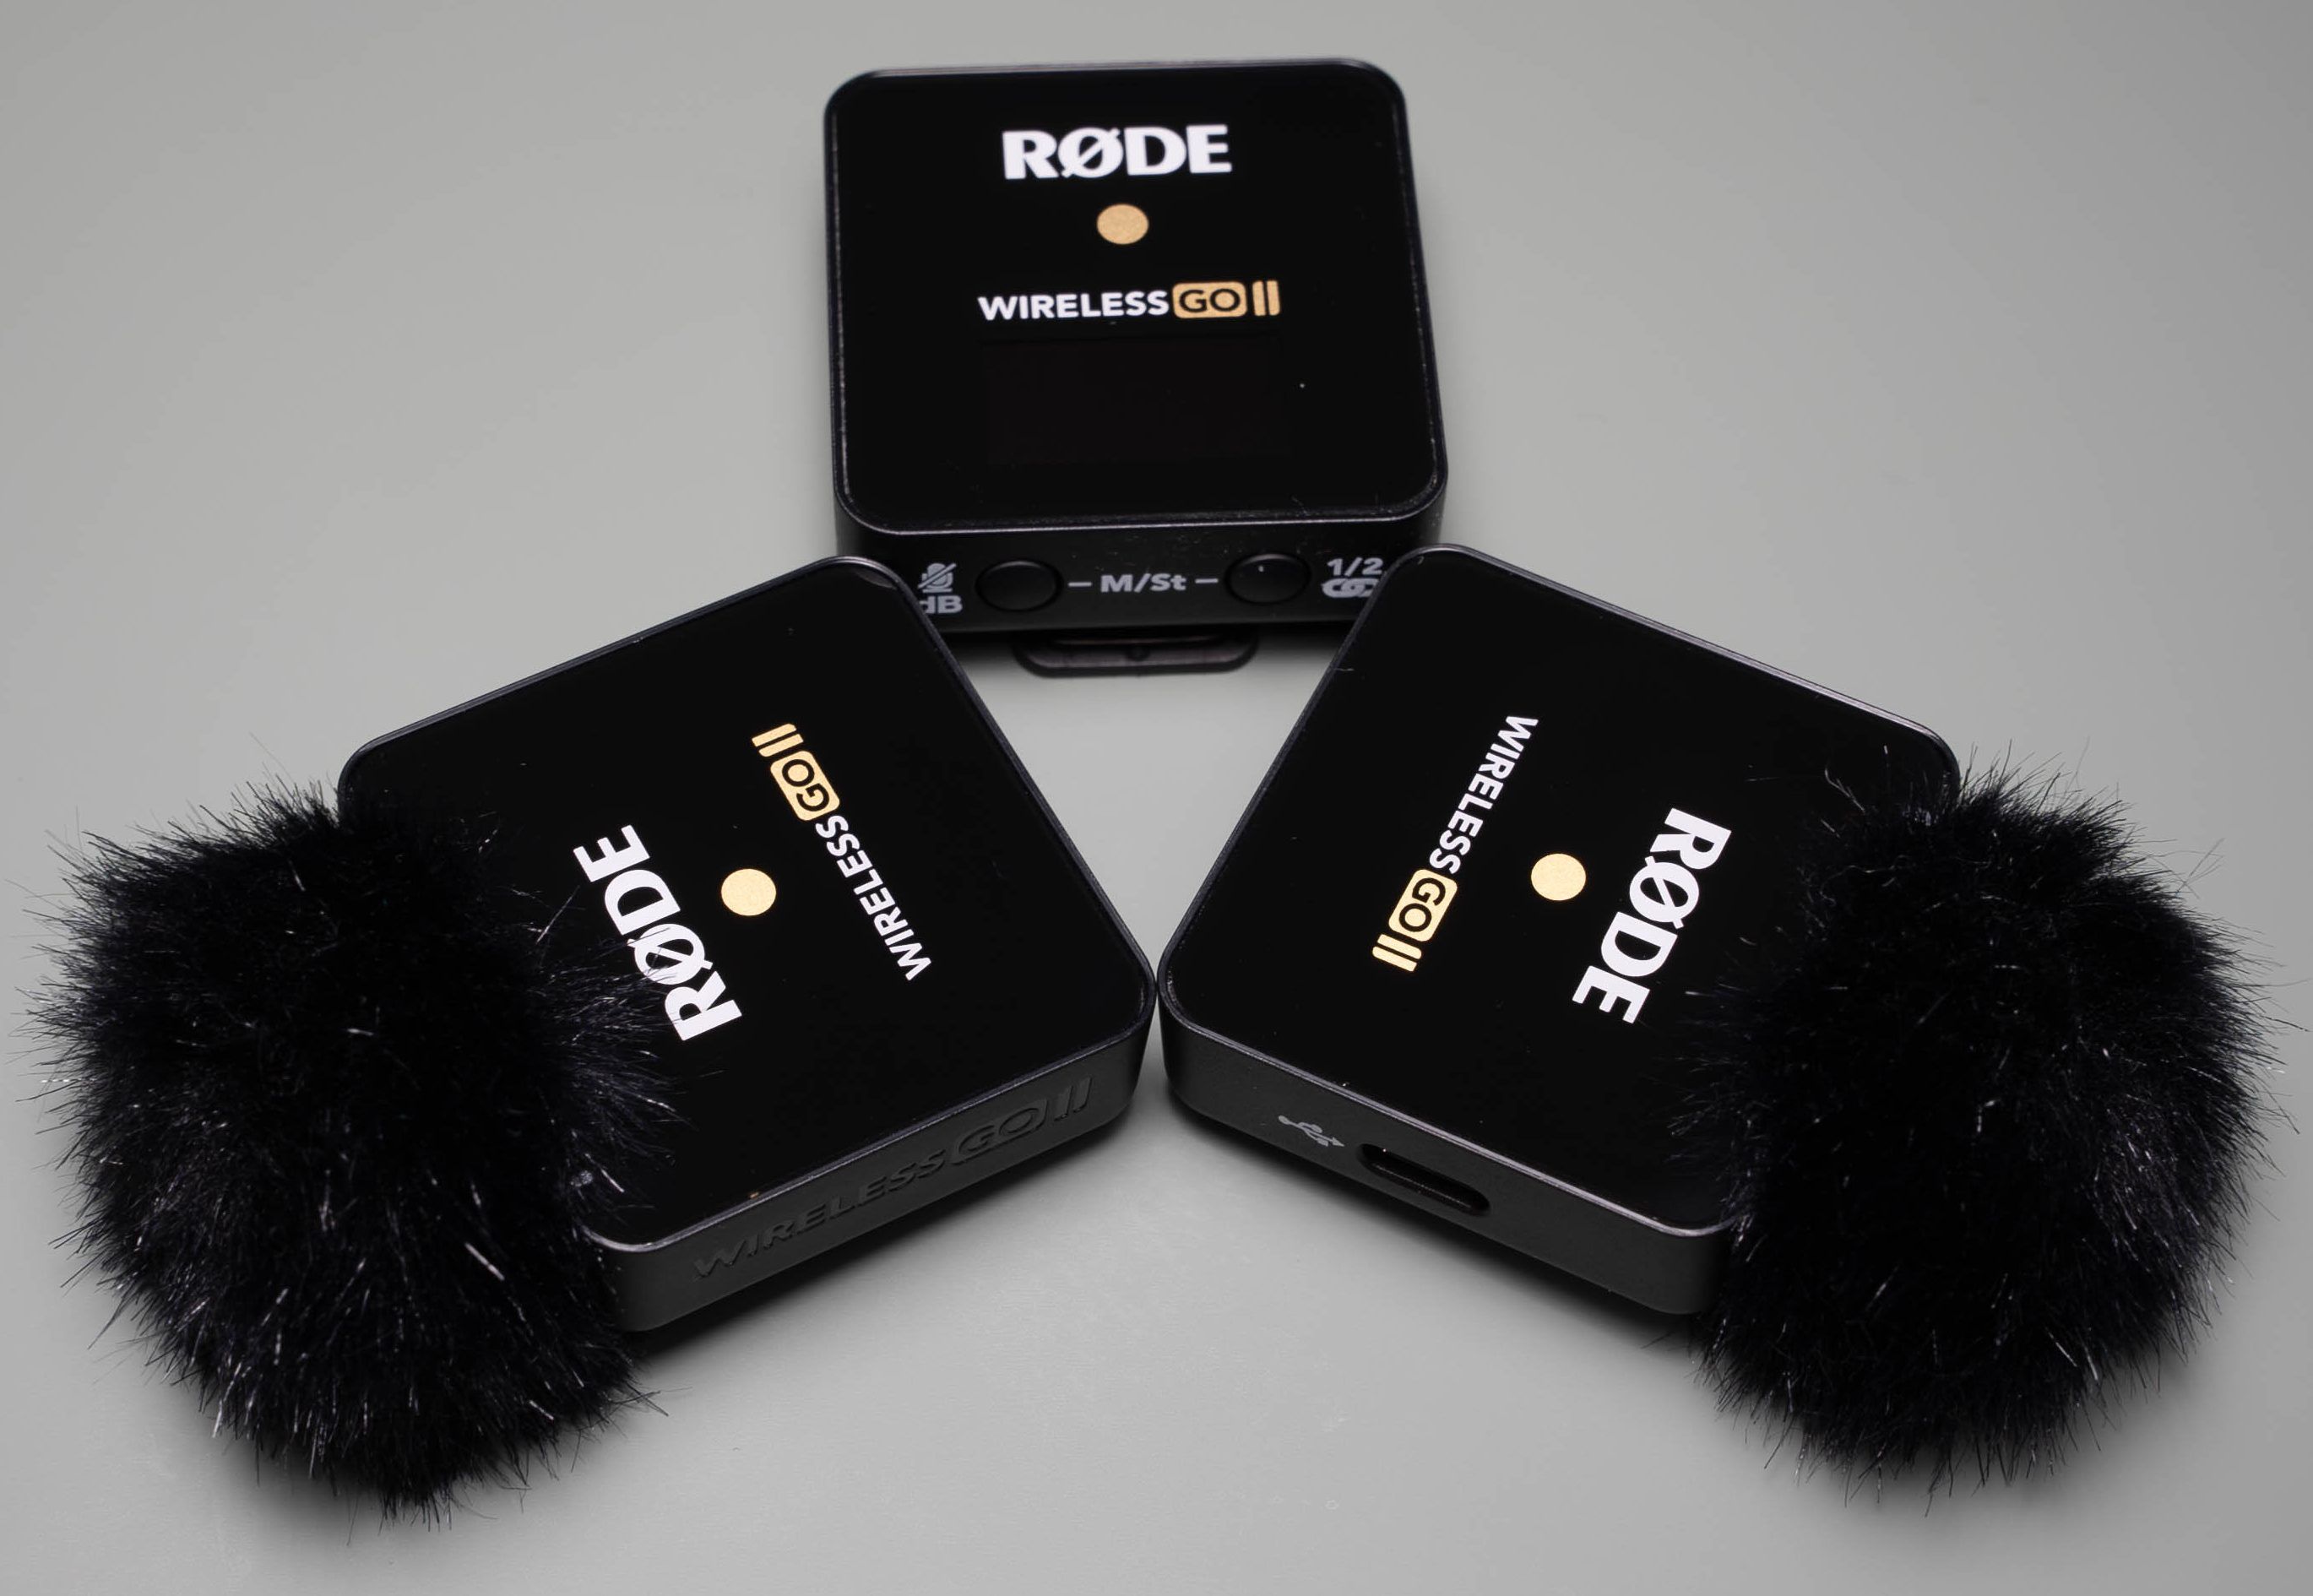 Rode's new Wireless GO II adds dual mic support, improved range and  internal recording